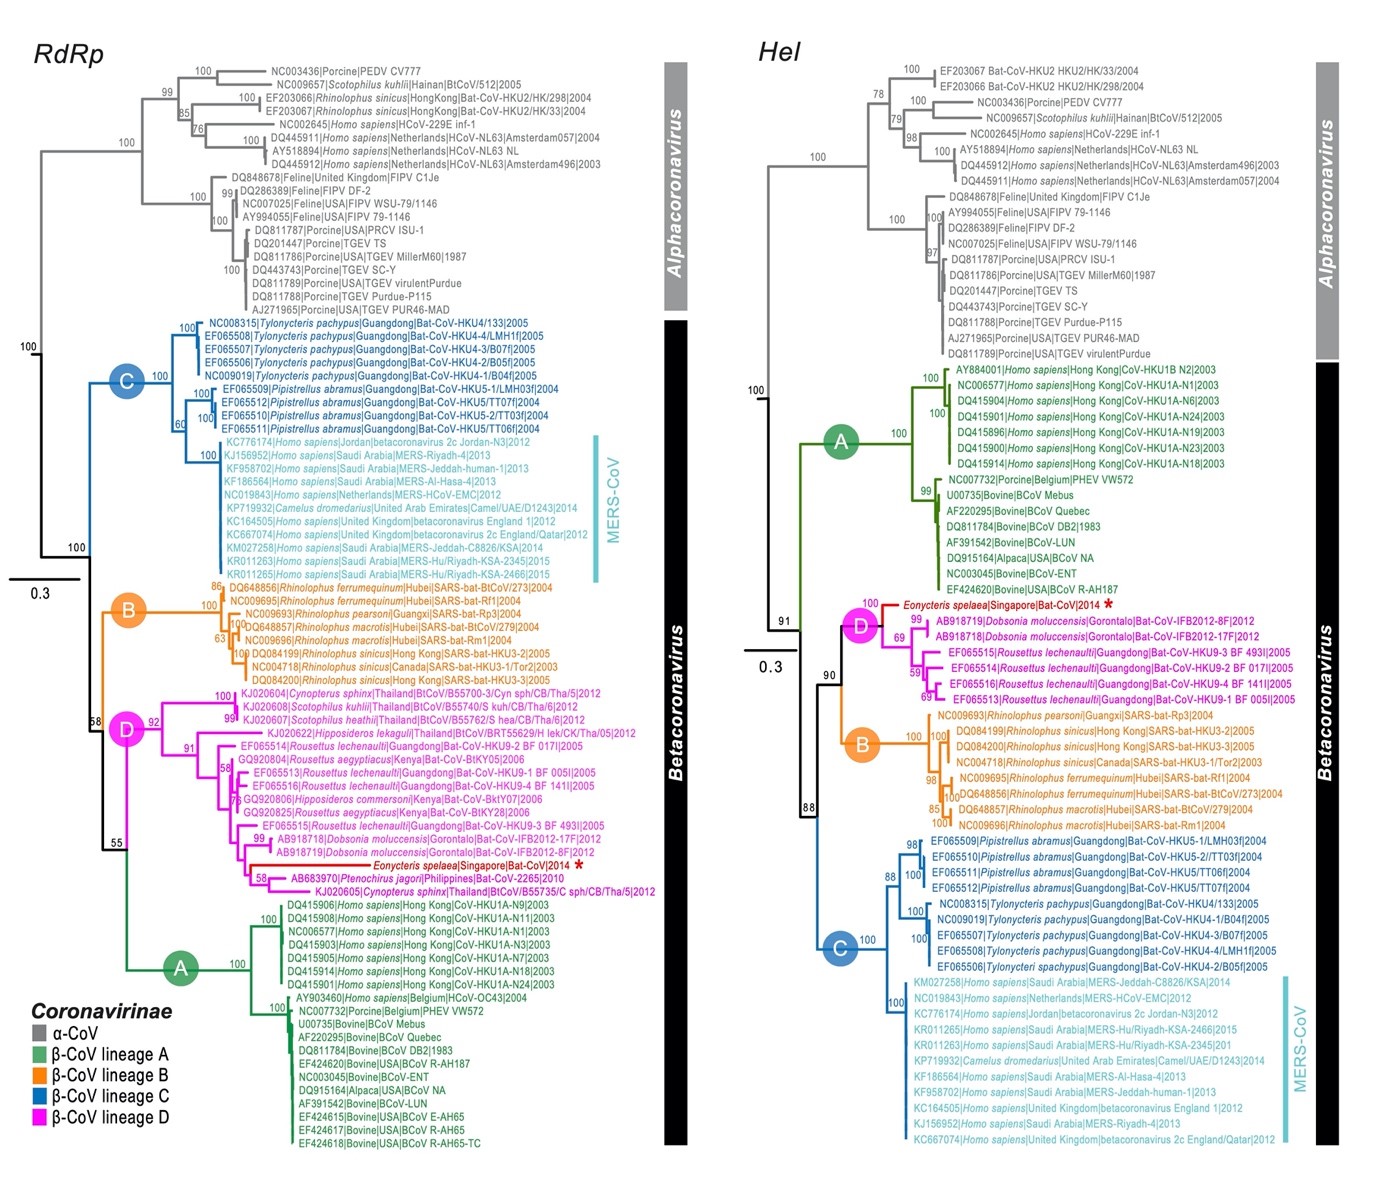 This phylogenetic tree of the RdRp and Hel nucleotide sequence of alpha- and beta-coronavirus published in 2016 includes newly idenfitied coronavirus sequences (marked with an asterisk) collected from cave nectar bats 